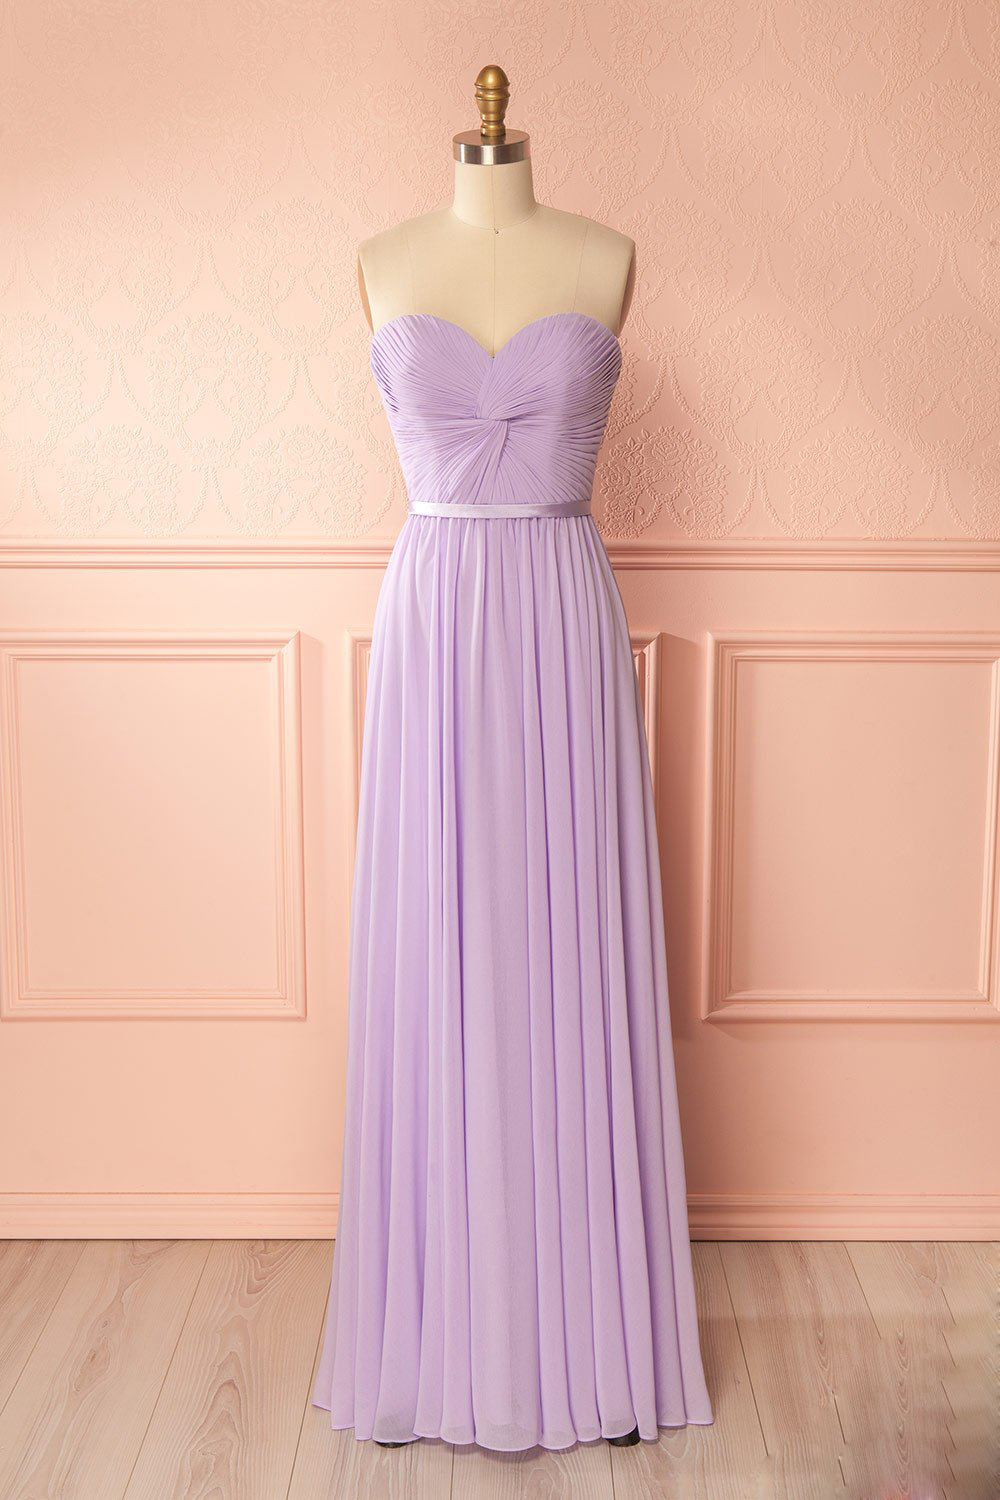 Lavender Sweetheart Floor Length Bridesmaid Dress, Long Party Dress With Draped Bodice